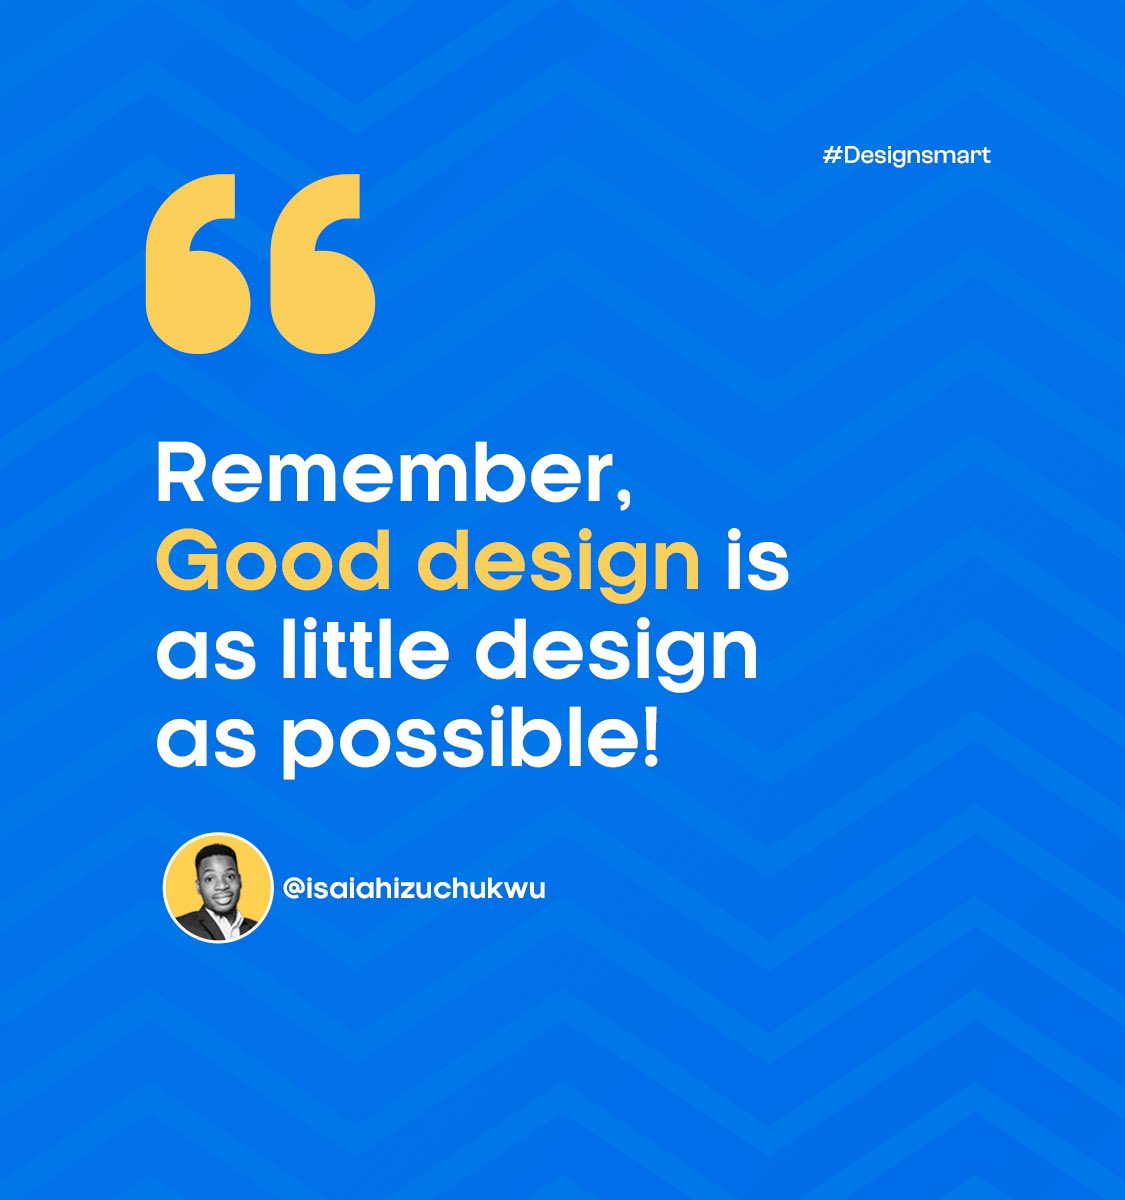 Always have this in mind👍
#designsmart #designers #product #Digital #bachelor #mosquitos